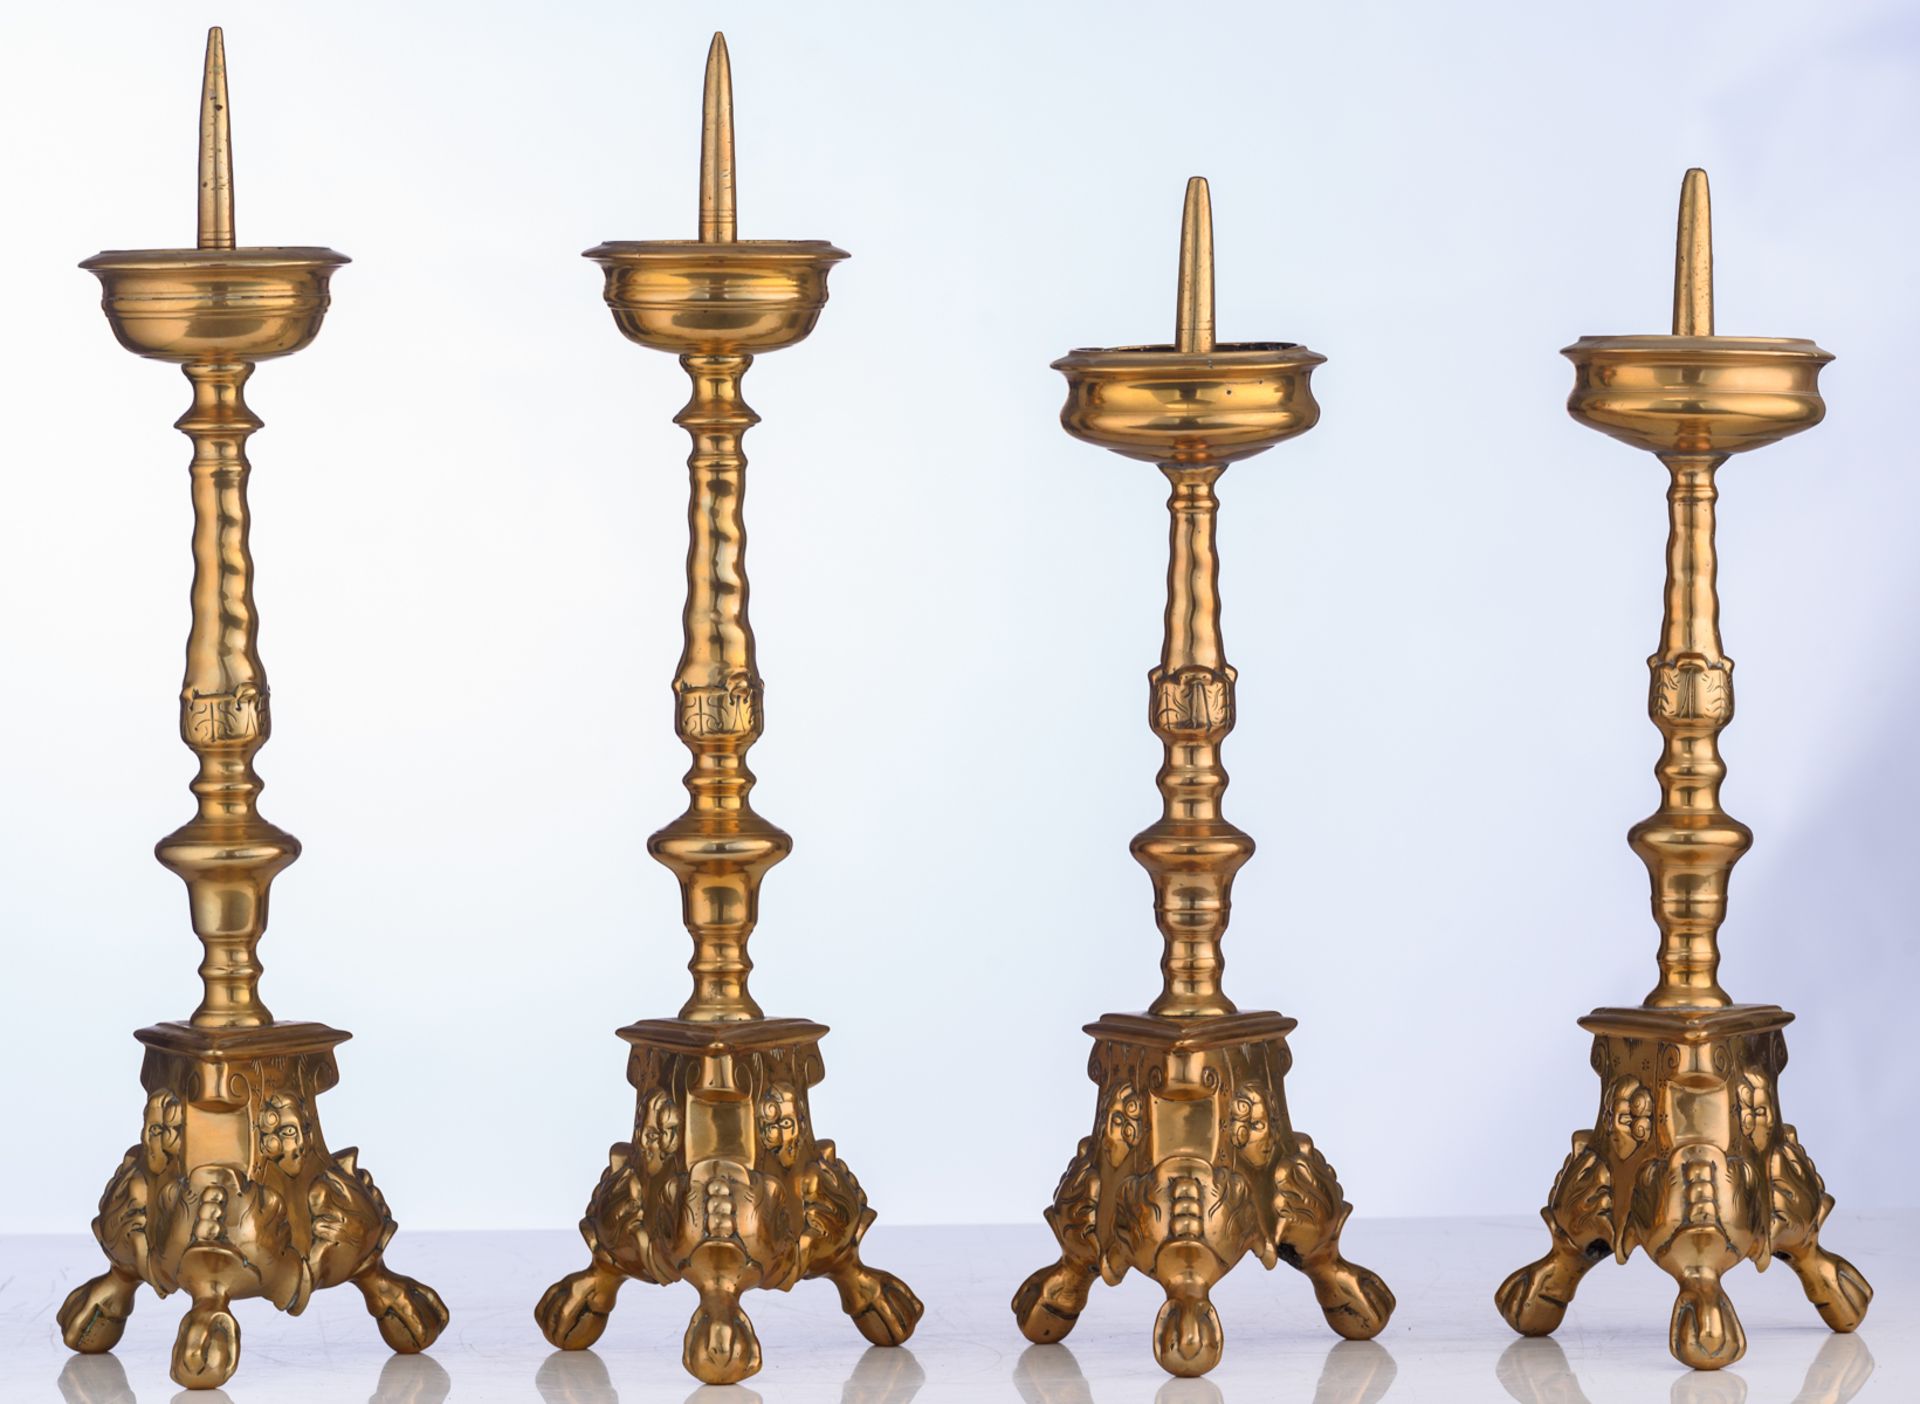 Two pair of Baroque bronze church candlesticks, 17thC, H 38,5 - 43 cm - Image 4 of 7